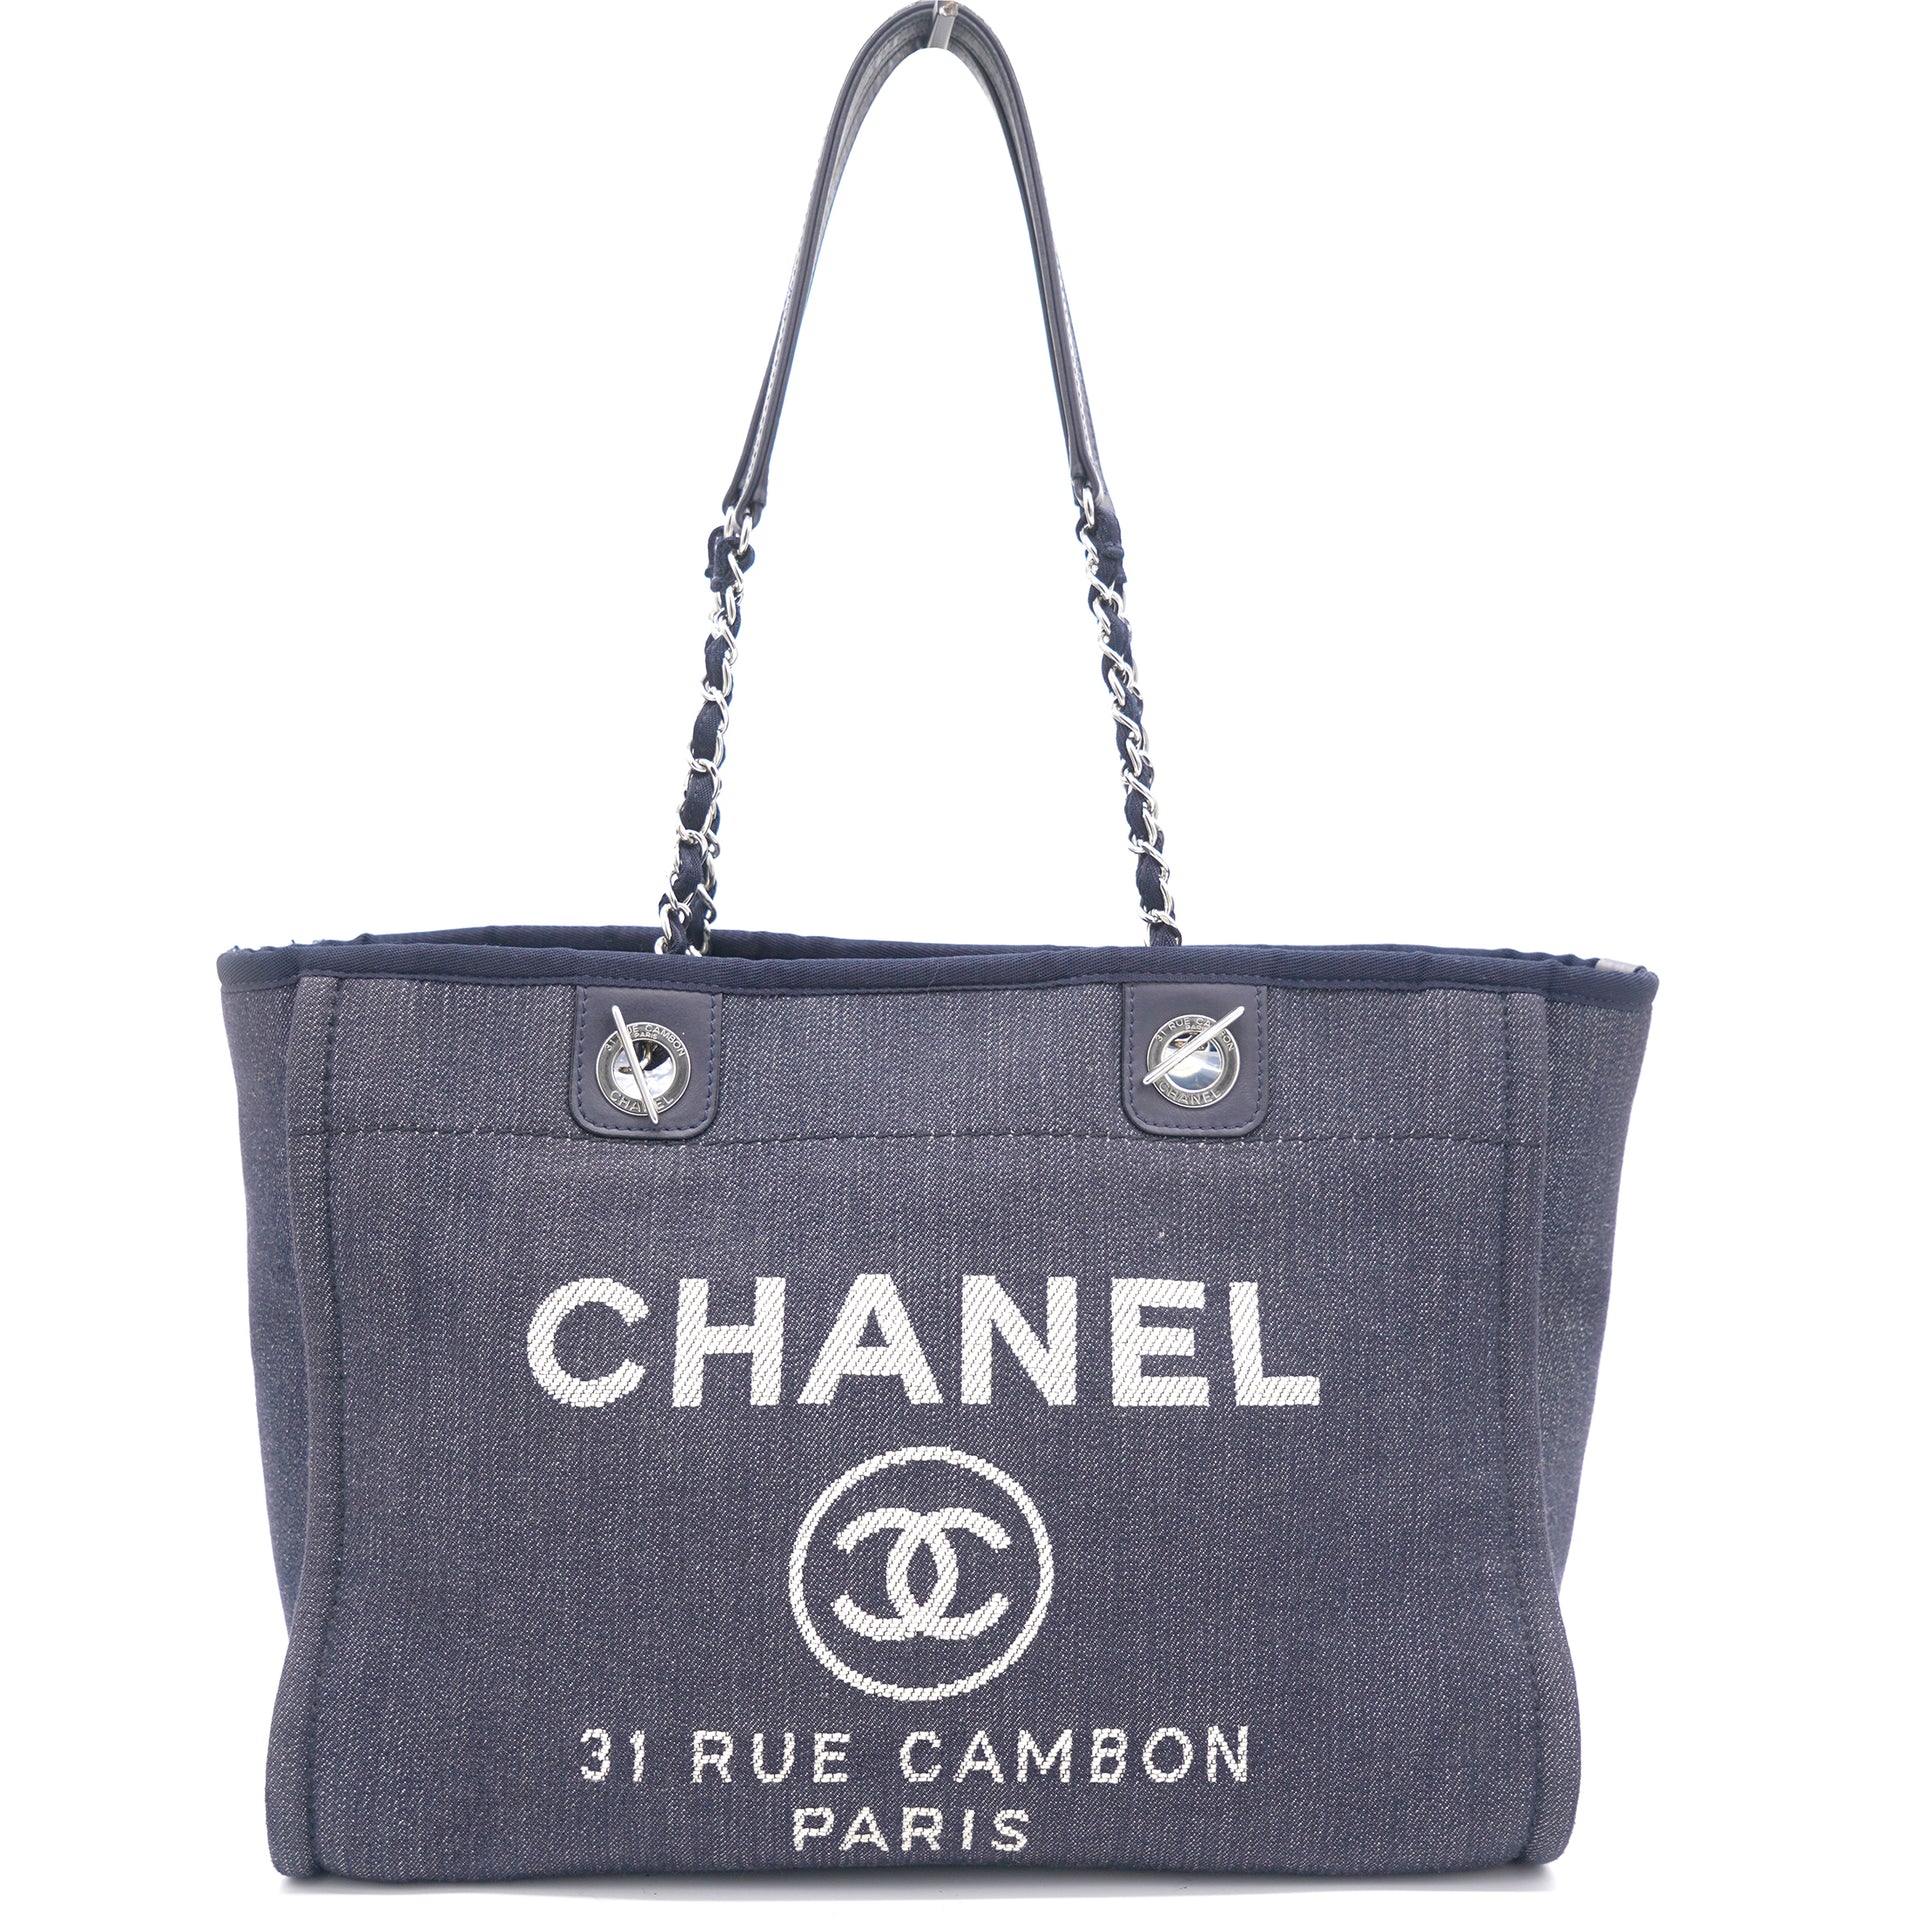 CHANEL Deauville Shopping Tote Bag Black